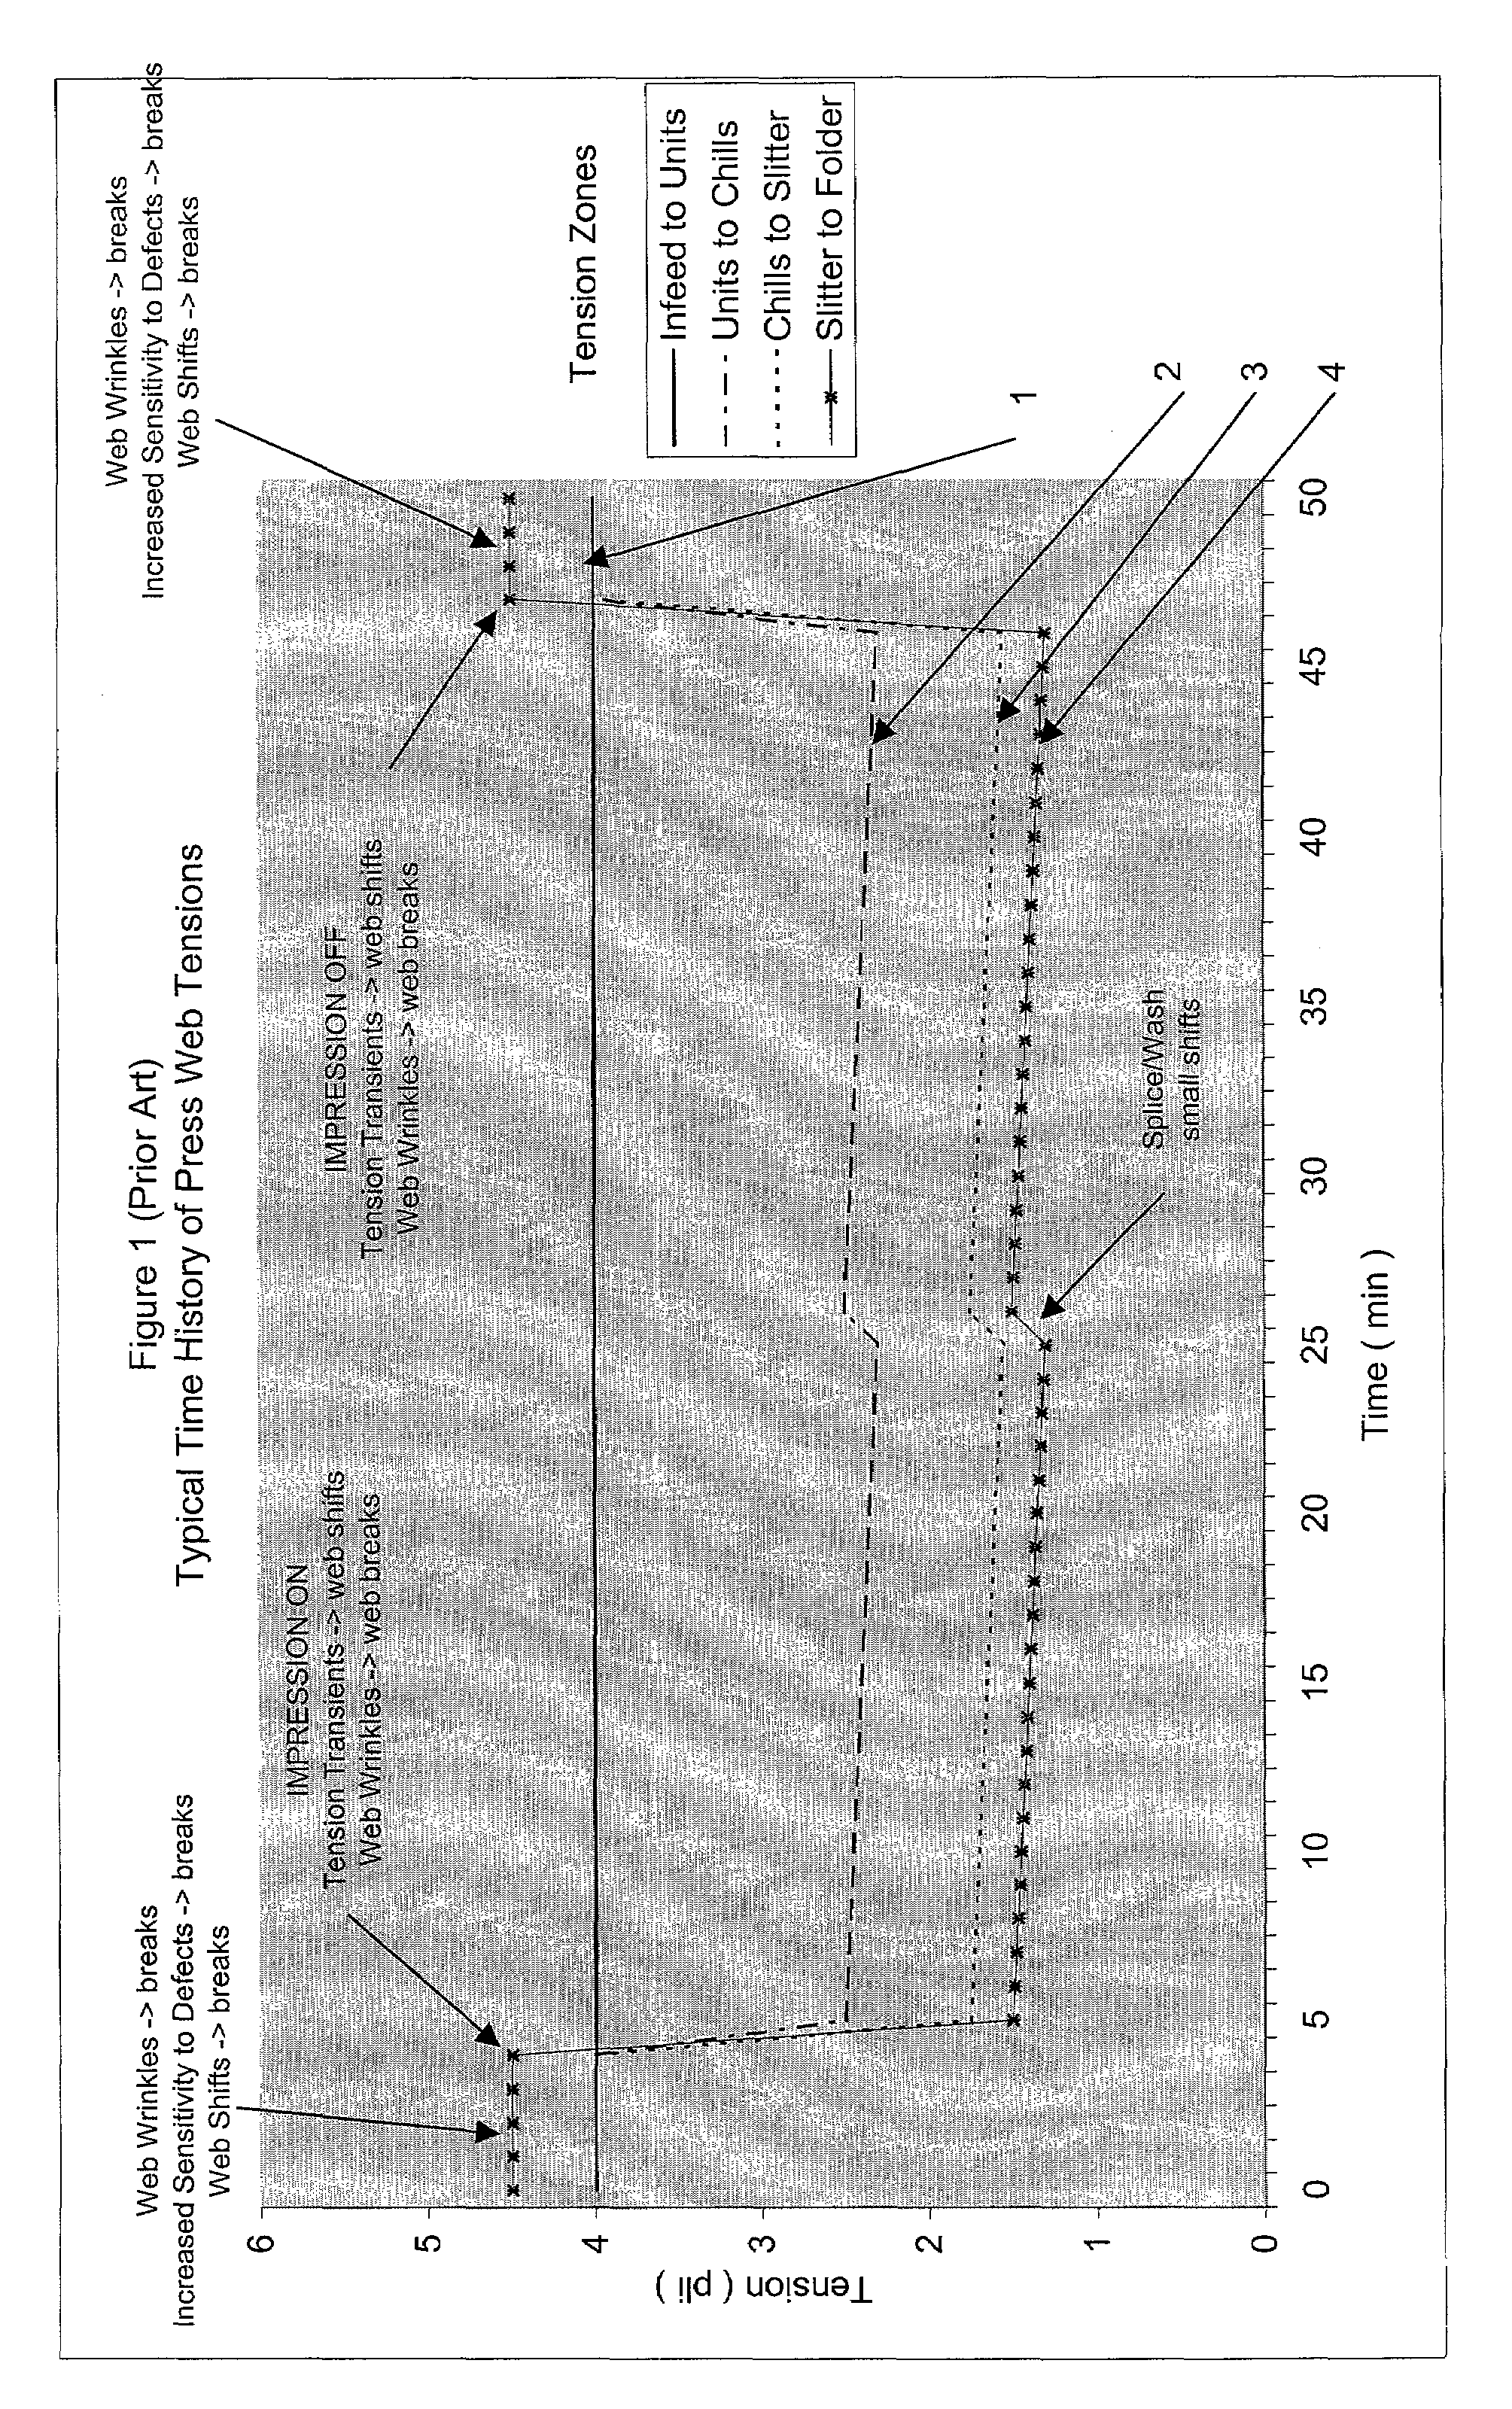 Device and method for controlling web tension